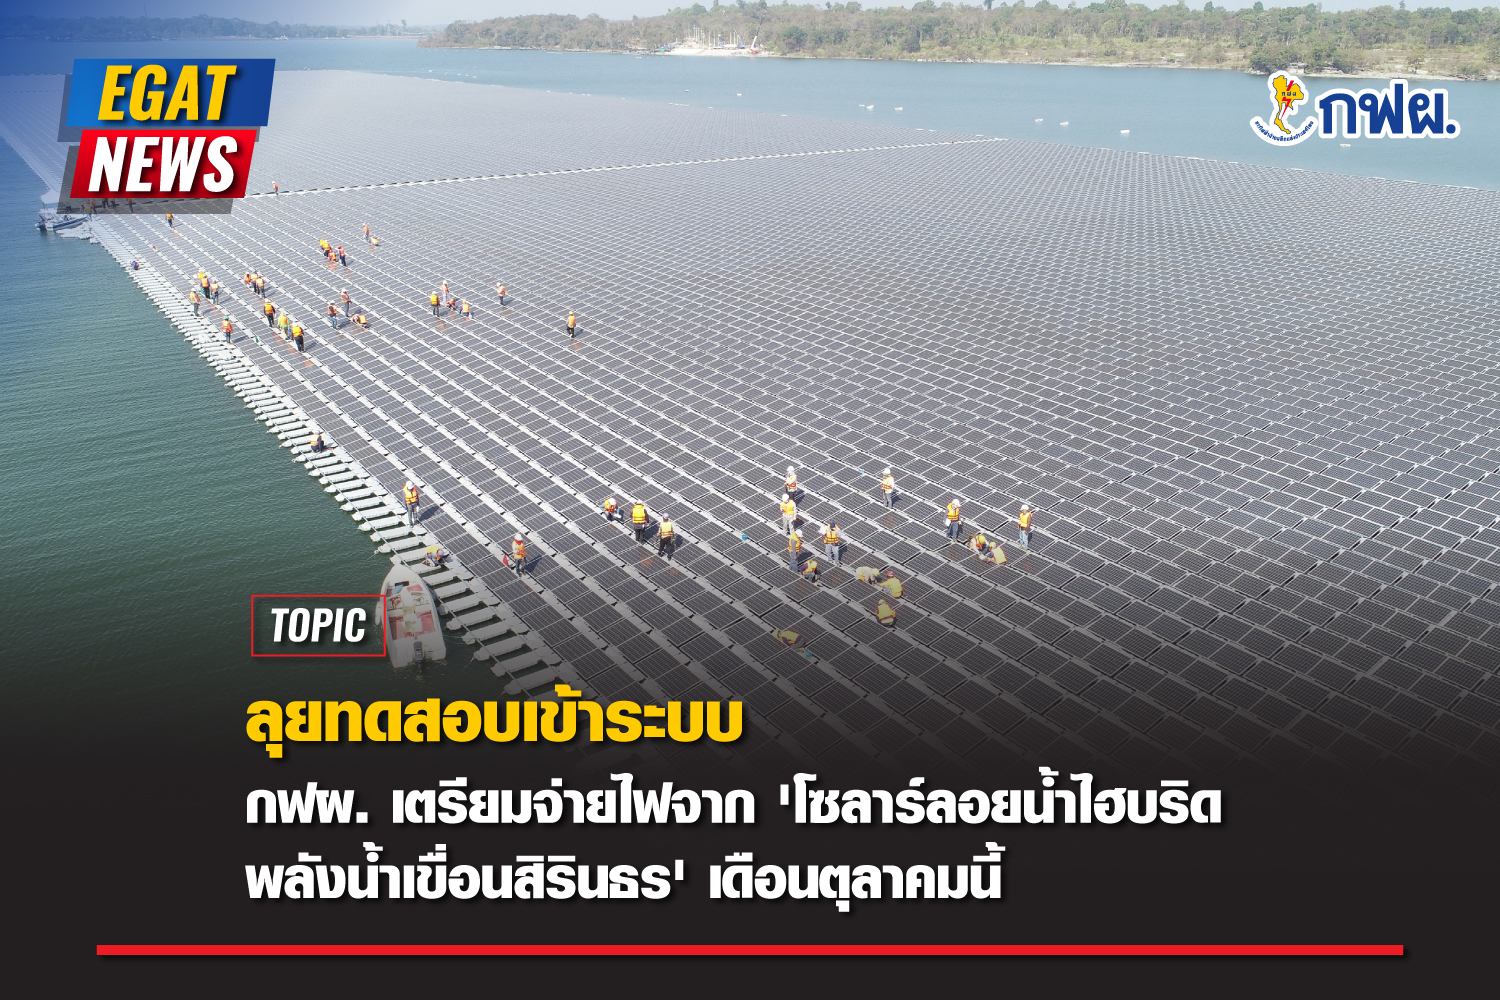 EGAT supports clean power and prepares to supply electricity from Hydro-Floating Solar Hybrid in Sirindhorn Dam this October